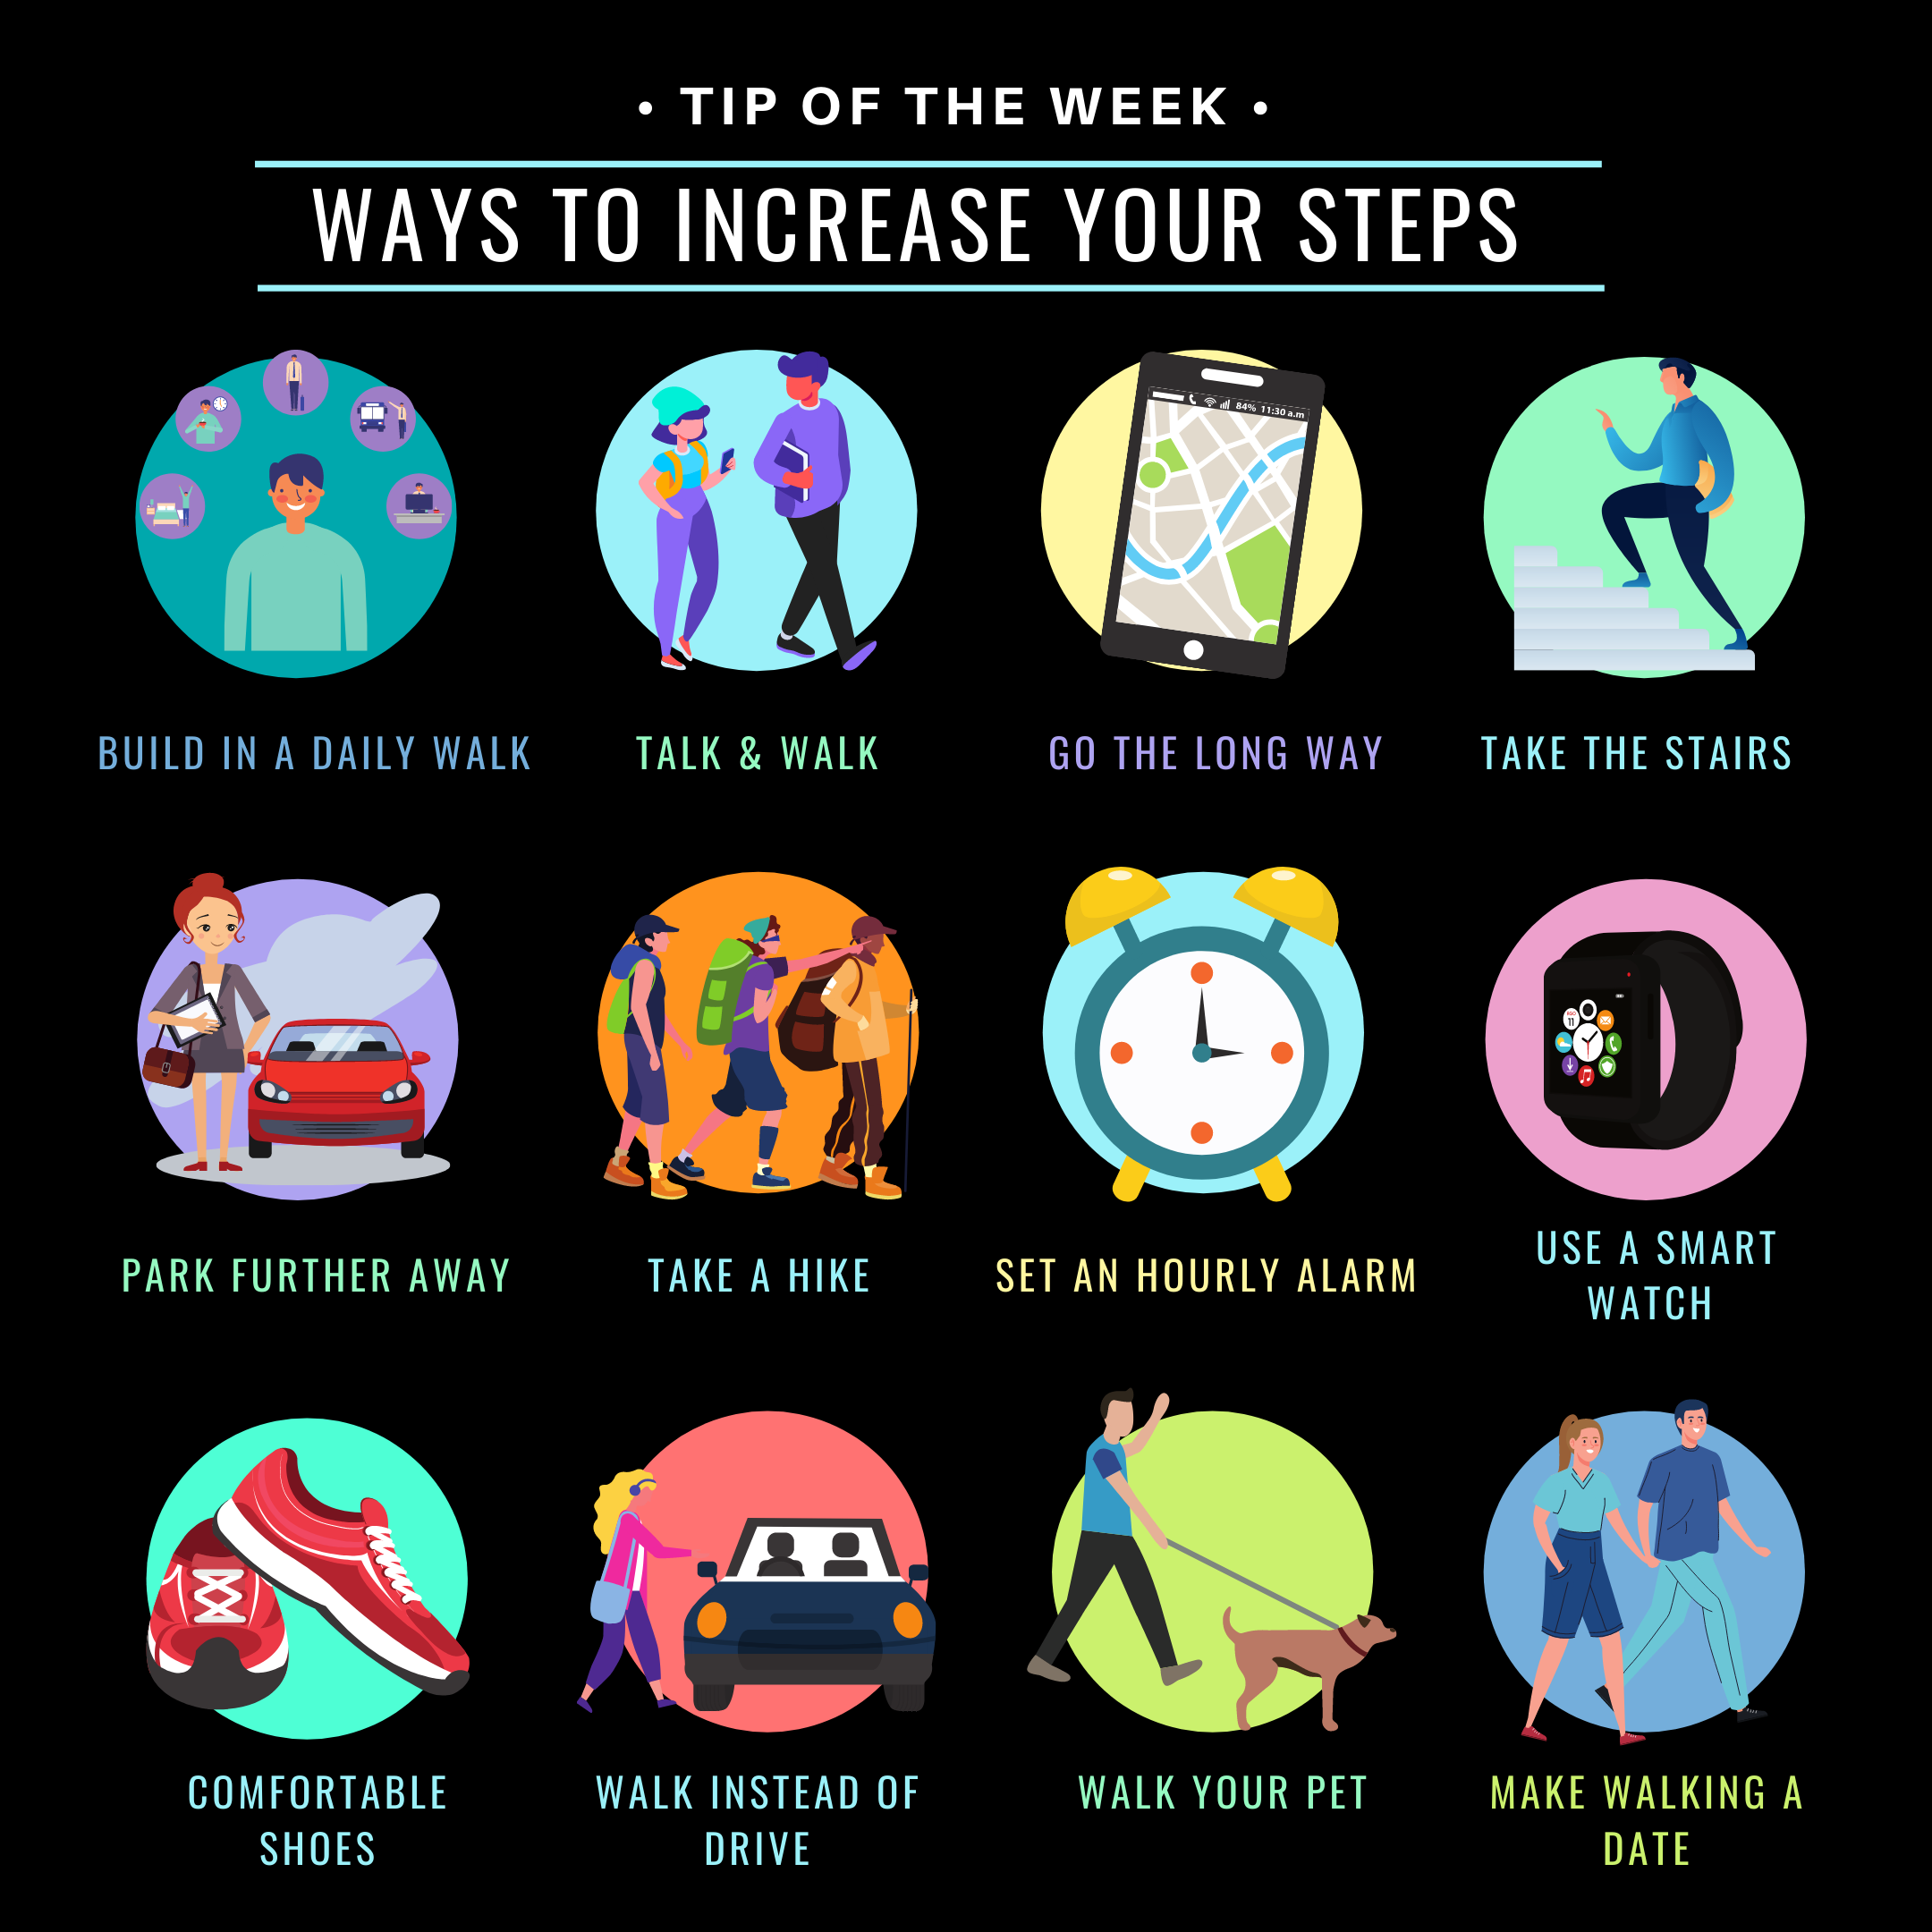 12 ways to increase your steps infographic